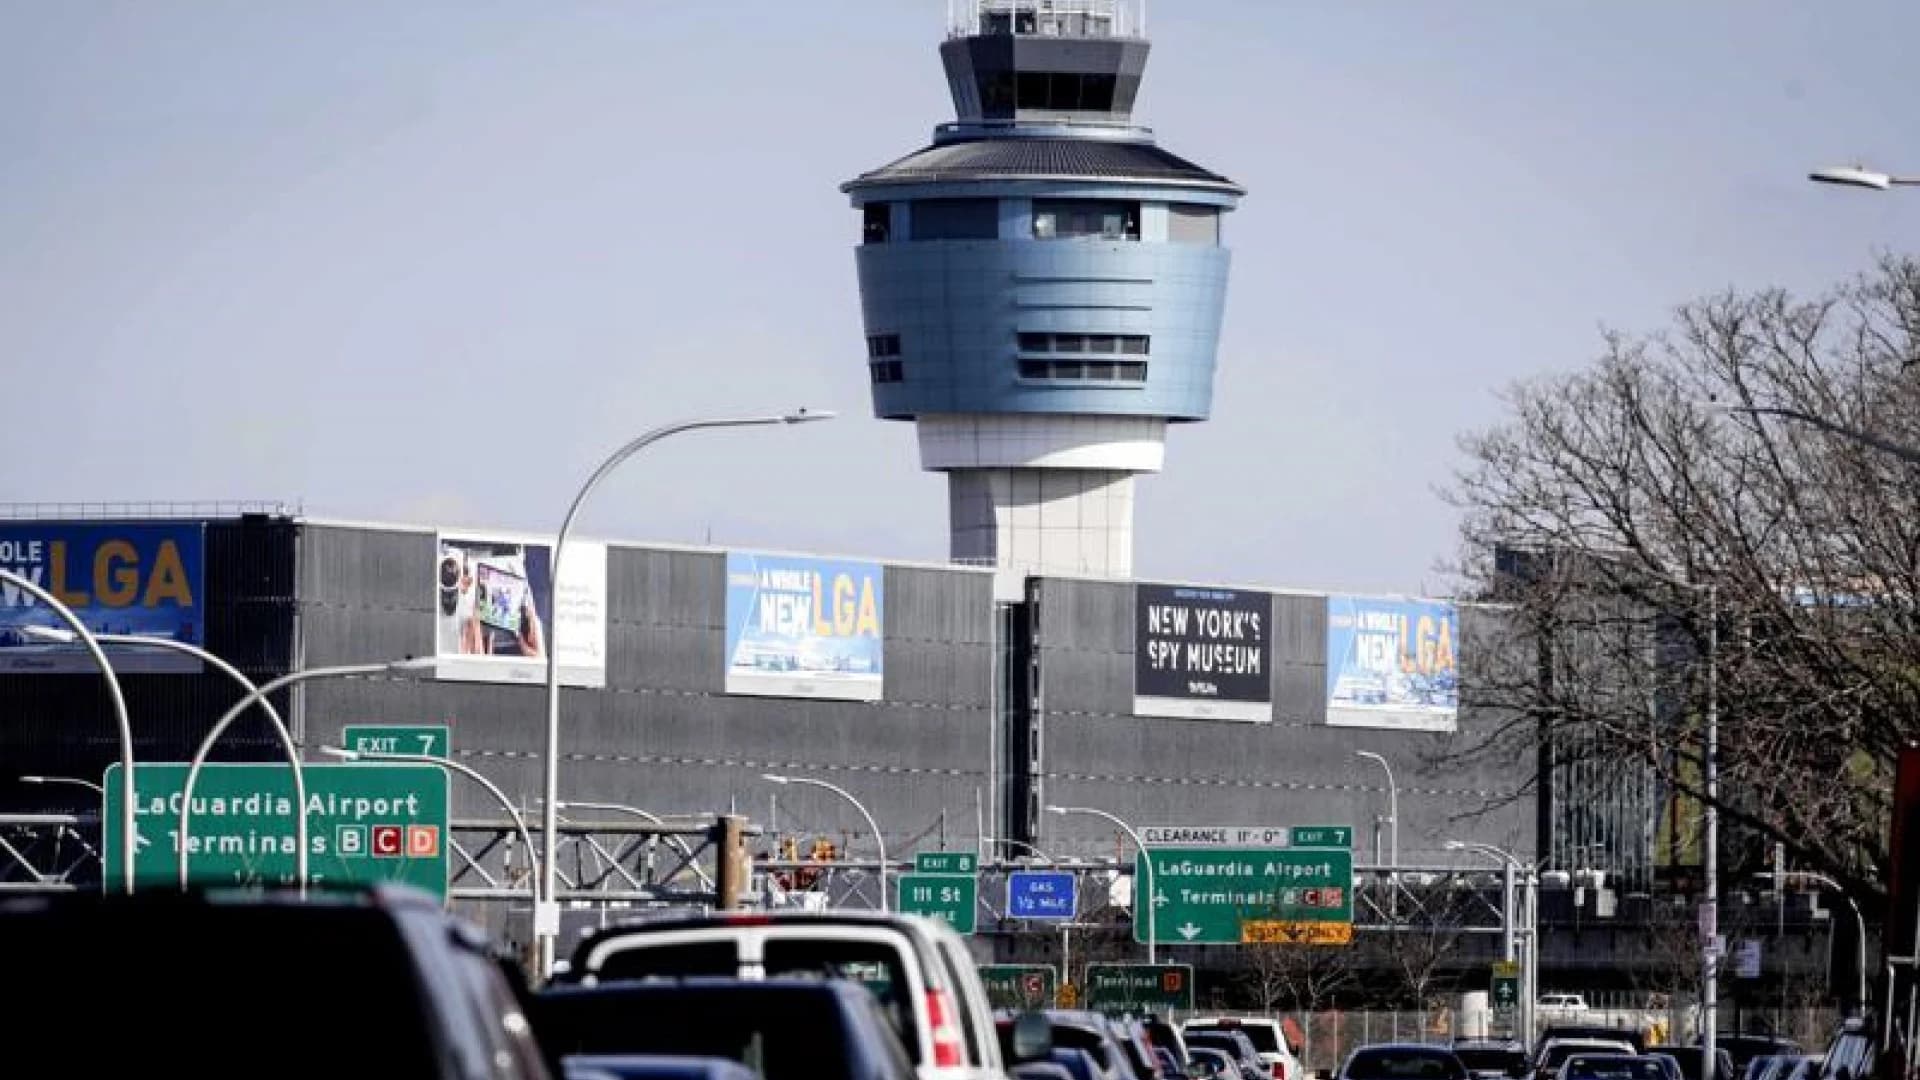 Rail link to LaGuardia Airport put on hold after criticism